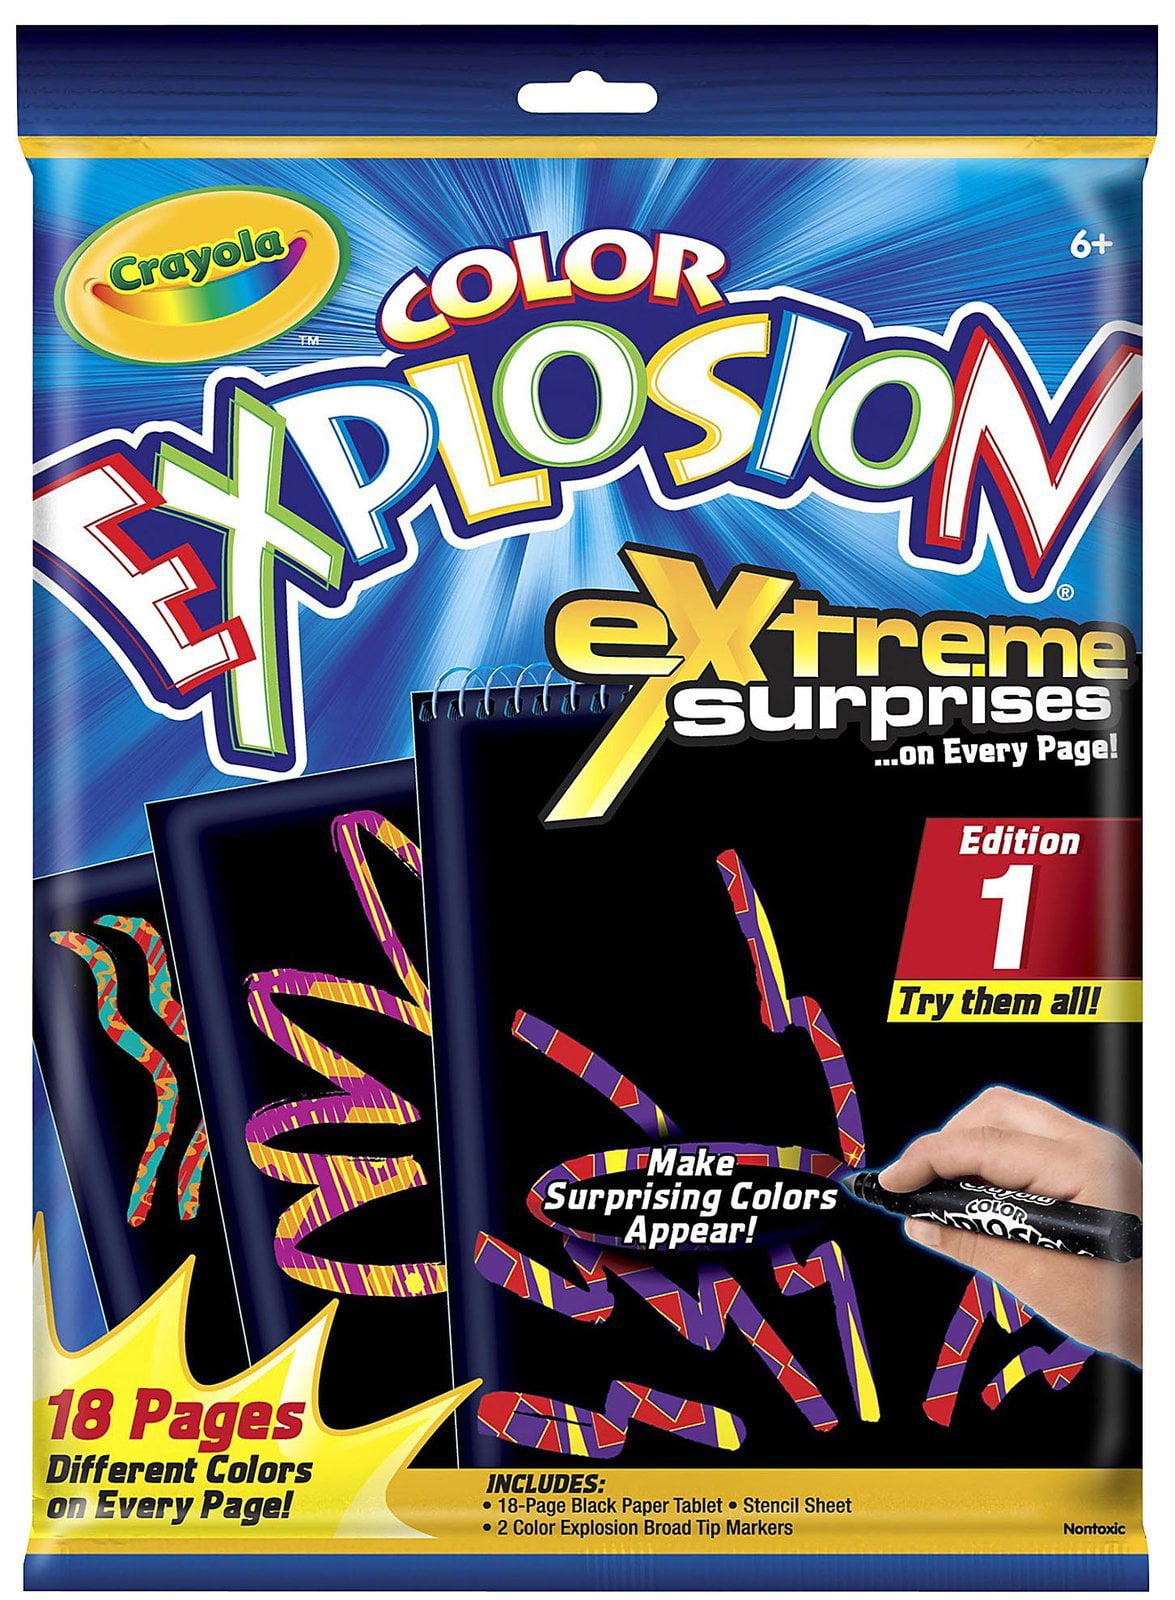 Crayola Color Explosion Extreme Surprises Edition 1 18 Pages 2 markers 